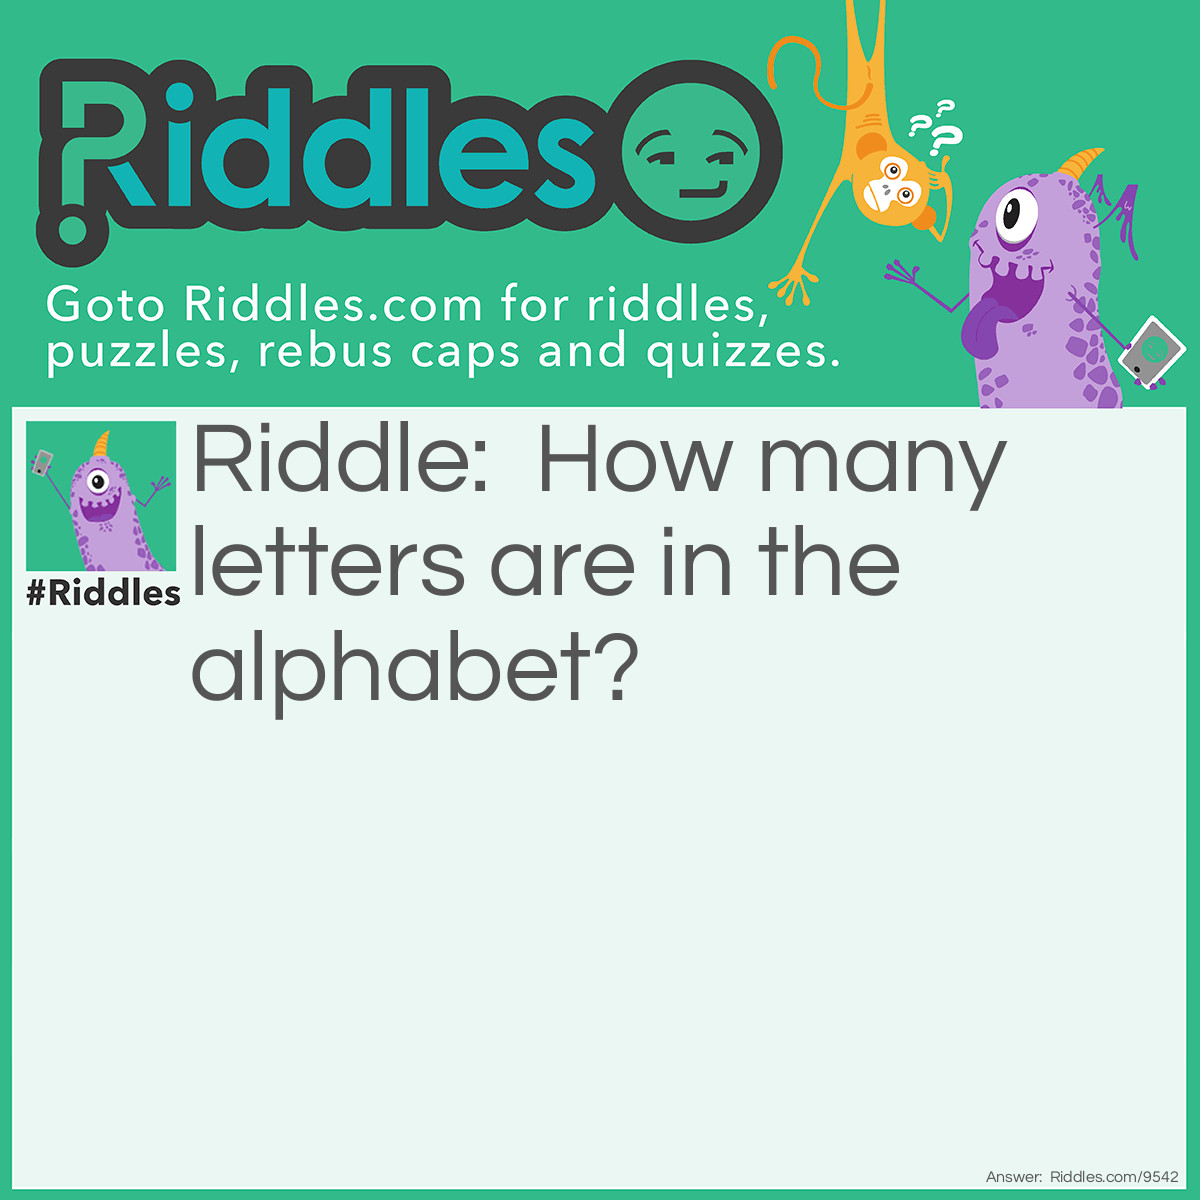 Riddle: How many letters are in the alphabet? Answer: Eleven letters are in “the alphabet”.